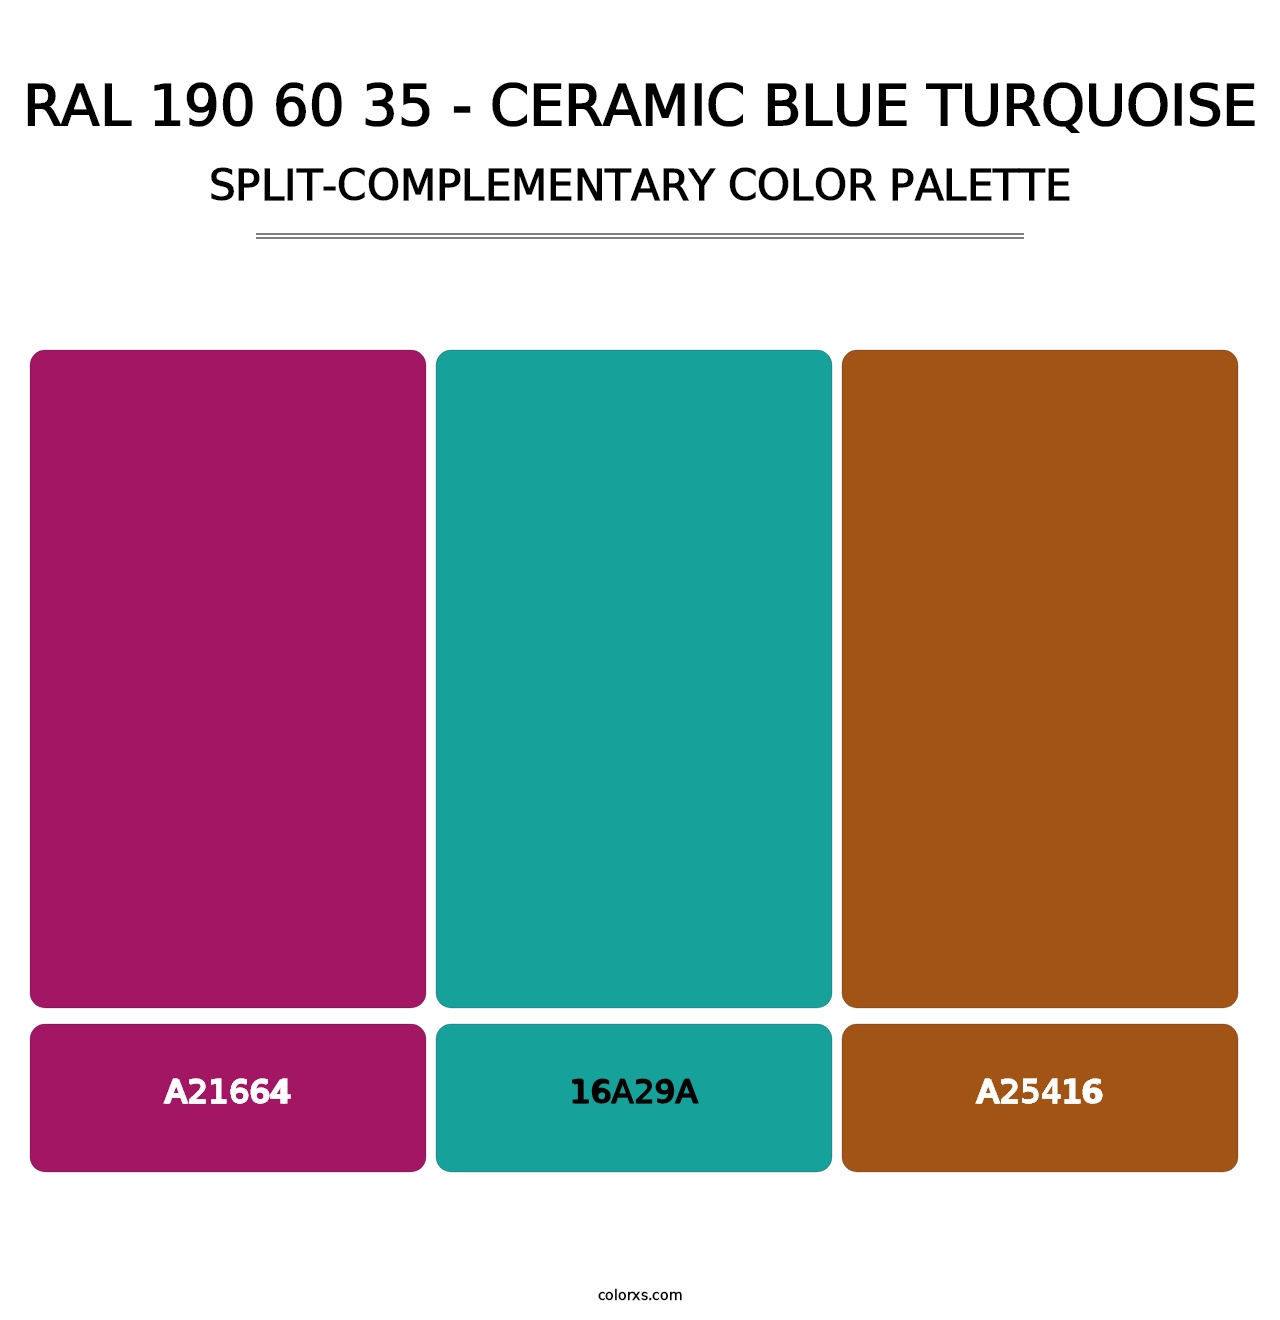 RAL 190 60 35 - Ceramic Blue Turquoise - Split-Complementary Color Palette